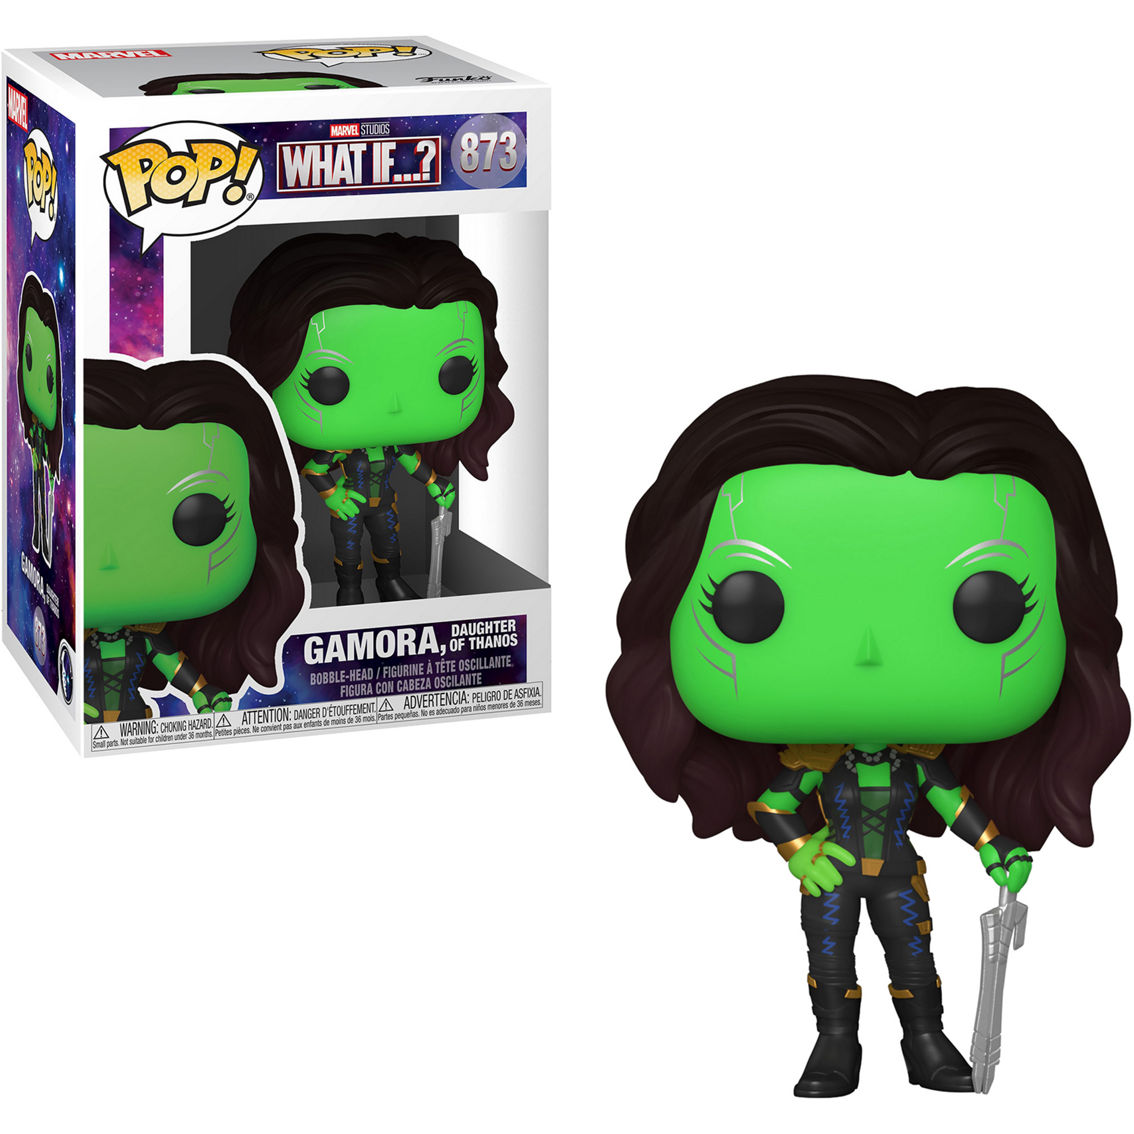 Funko POP! Marvel What If Collector Set - Image 5 of 7